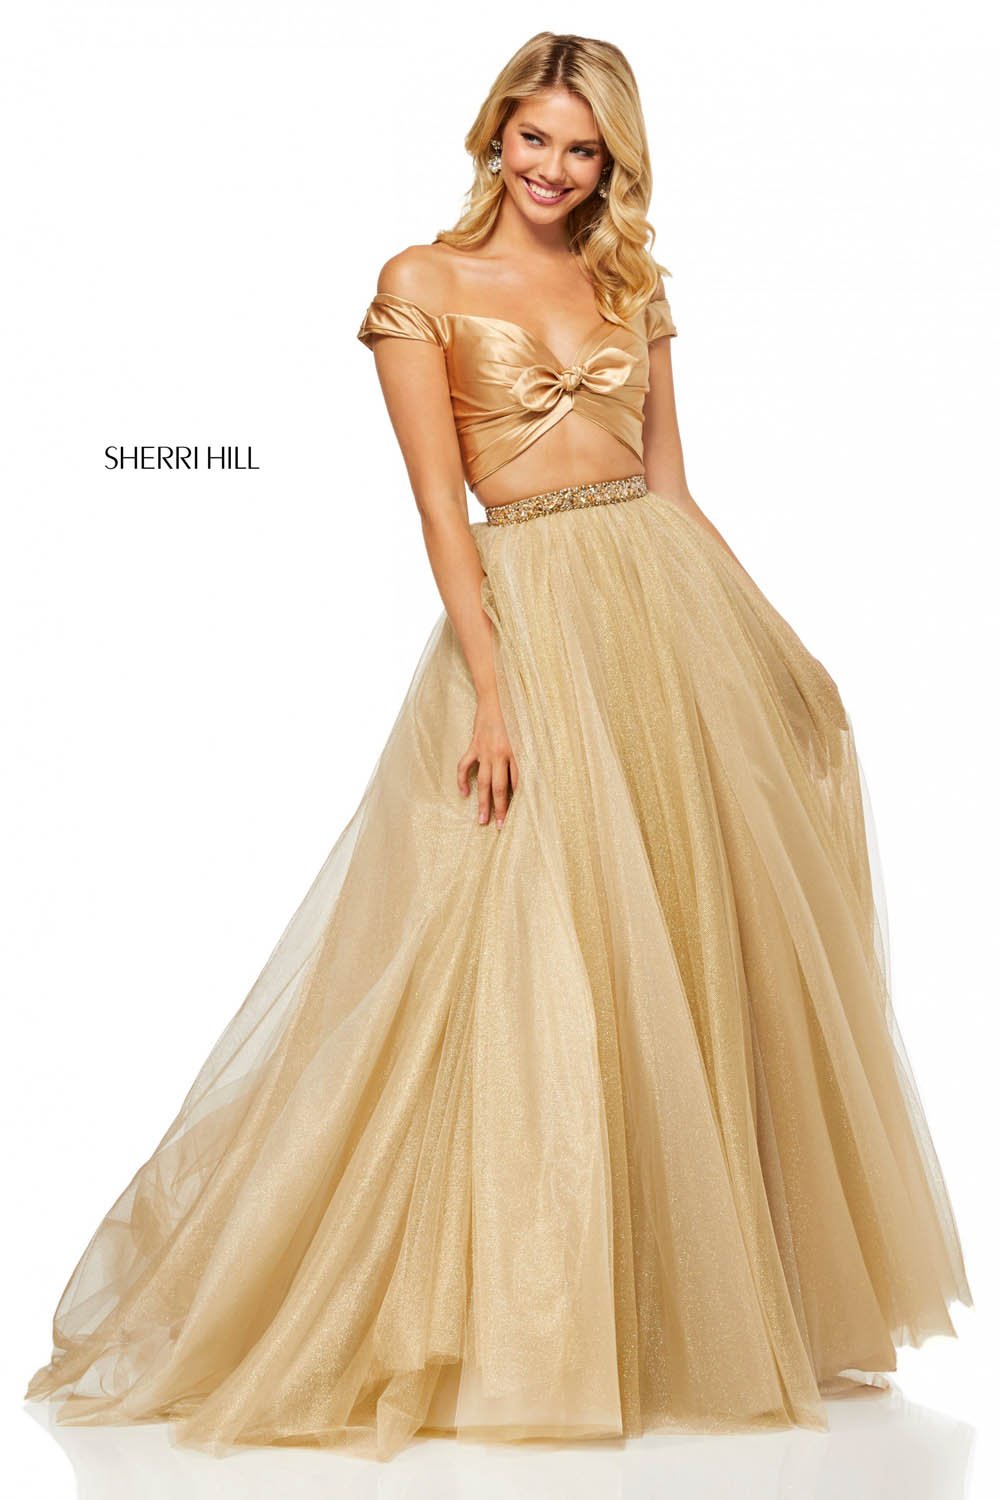 Sherri Hill 52406 dress images in these colors: Gold.